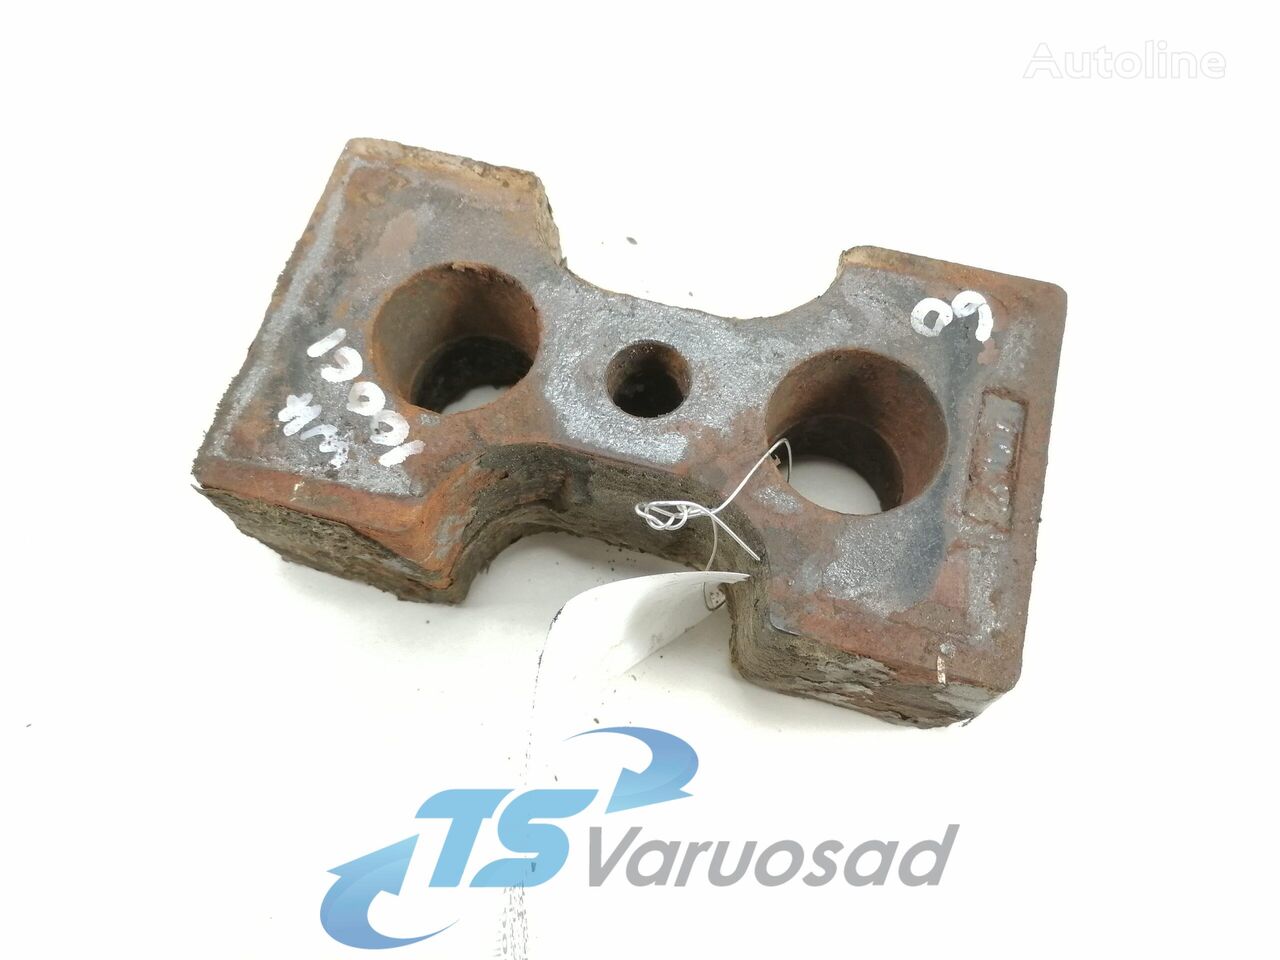 Spring seat Volvo Spring seat 20375244 for Volvo FM9 truck tractor